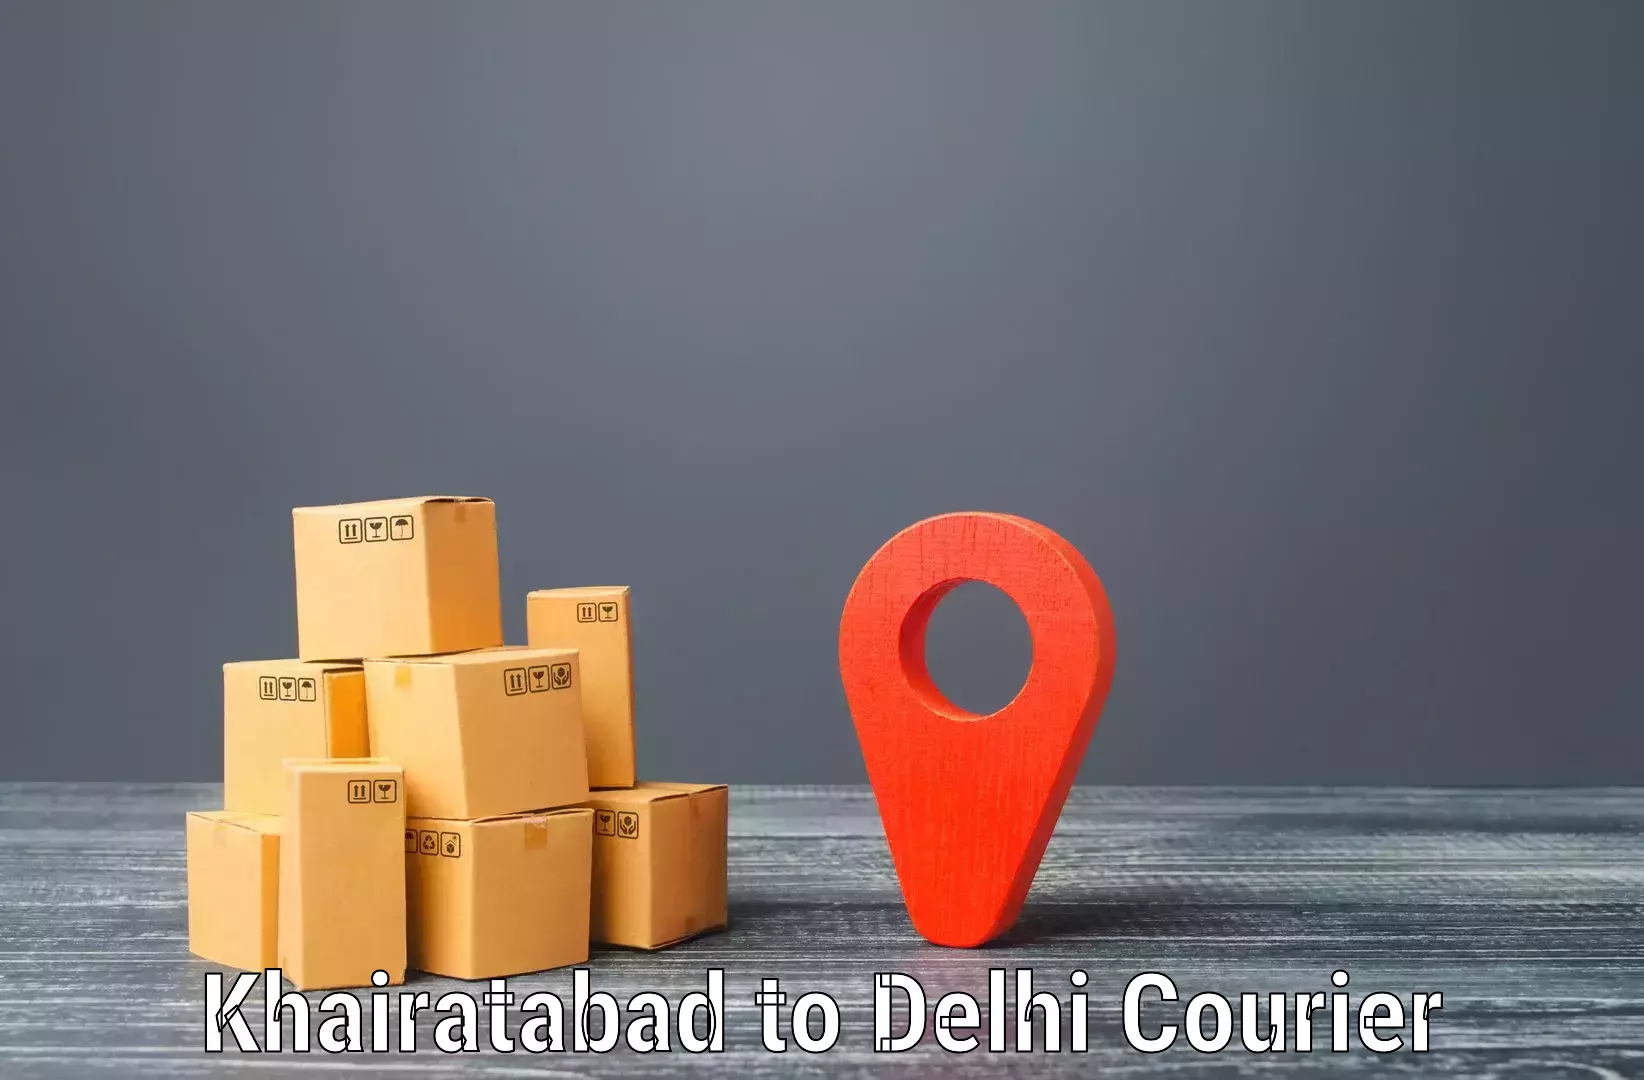 Global delivery options Khairatabad to NCR